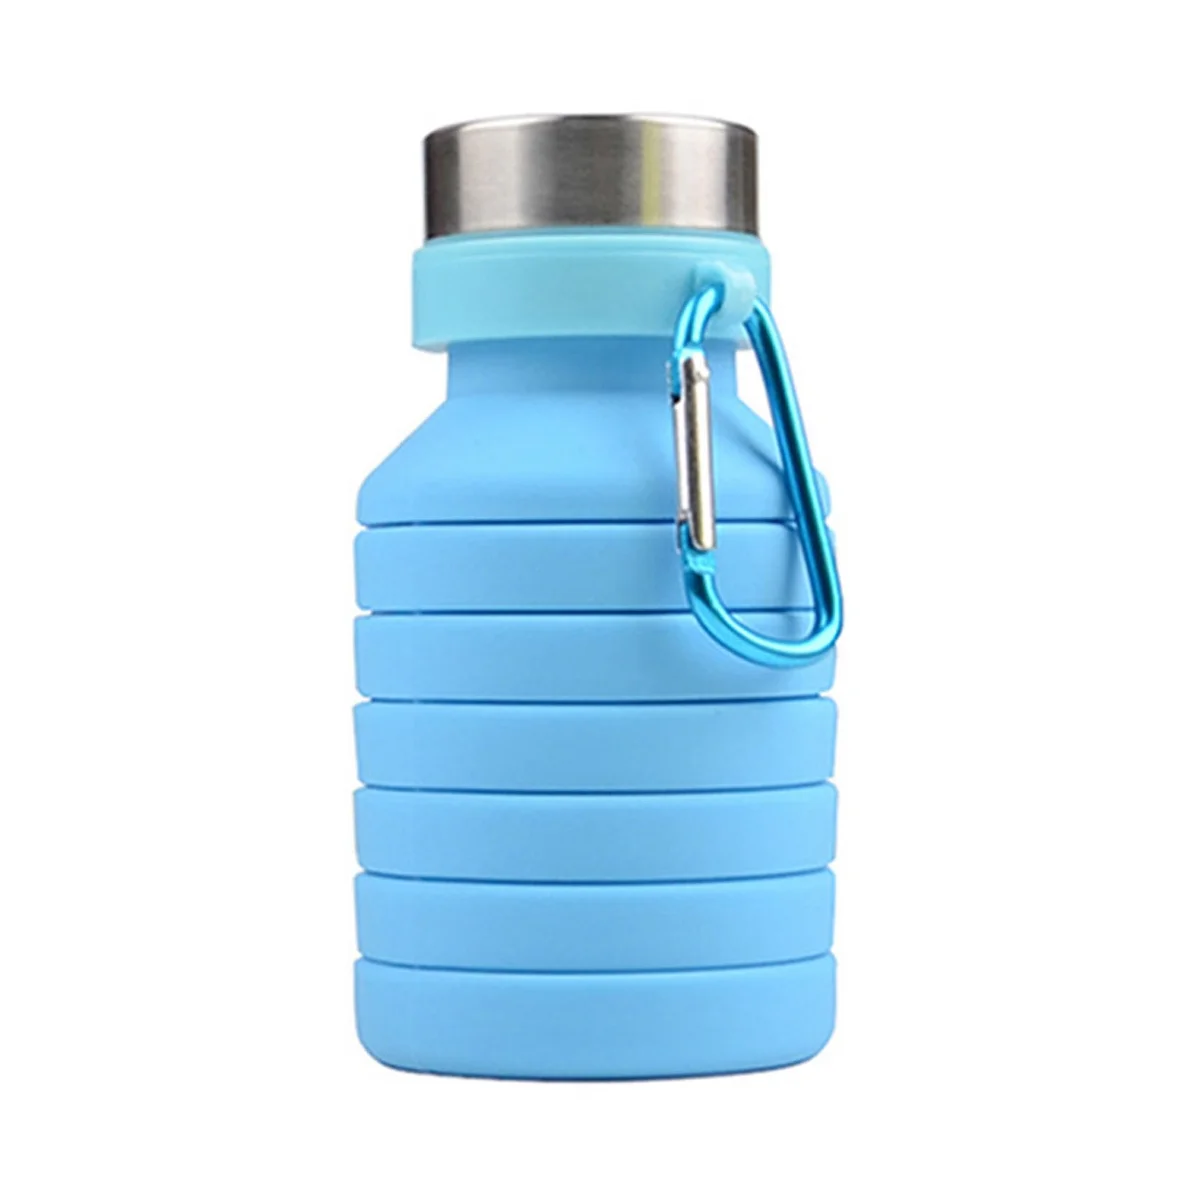 

550ML Folding Cup Sports Travel Mug Foldable Collapsible Telescopic Silicone Water Bottle Outdoor Water Cups, Blue